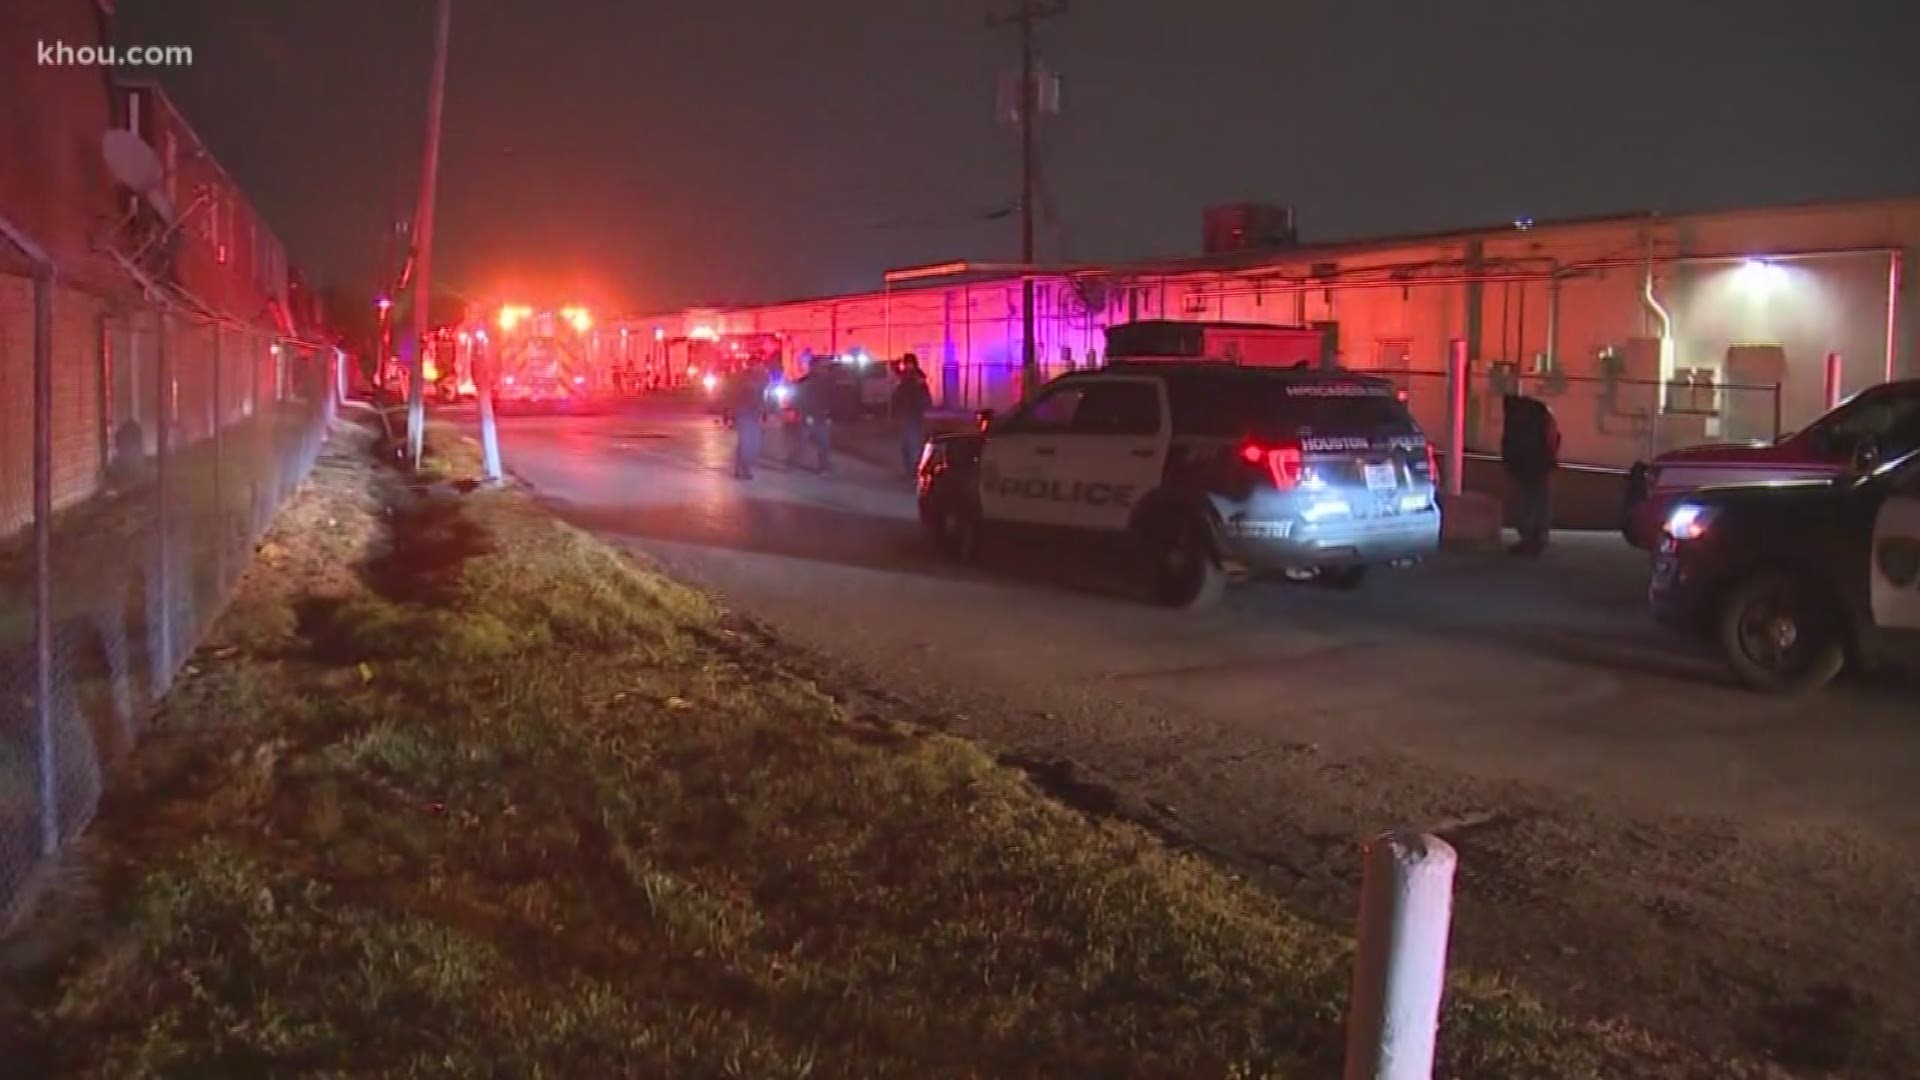 A man was killed Wednesday when he fell in a hole behind a north Houston shopping center, according to police.